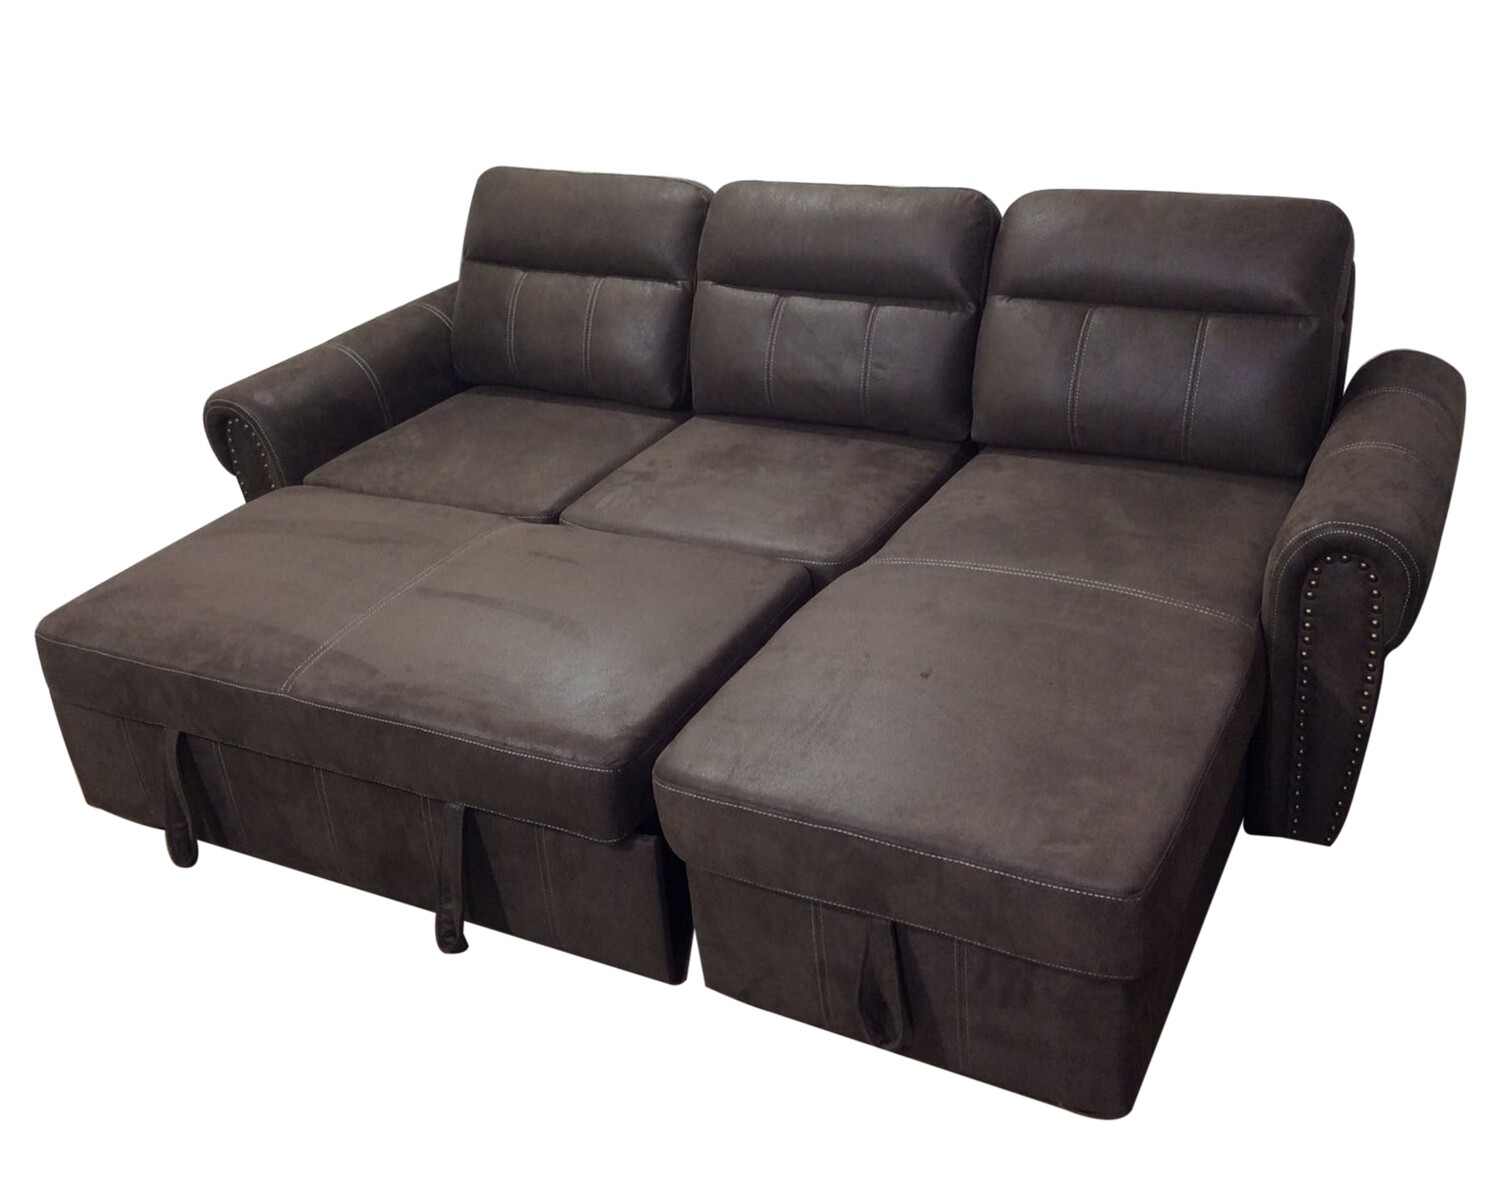 Flotti Raven Convertible L-Sofa with Pull-Out Bed (Dark Brown)